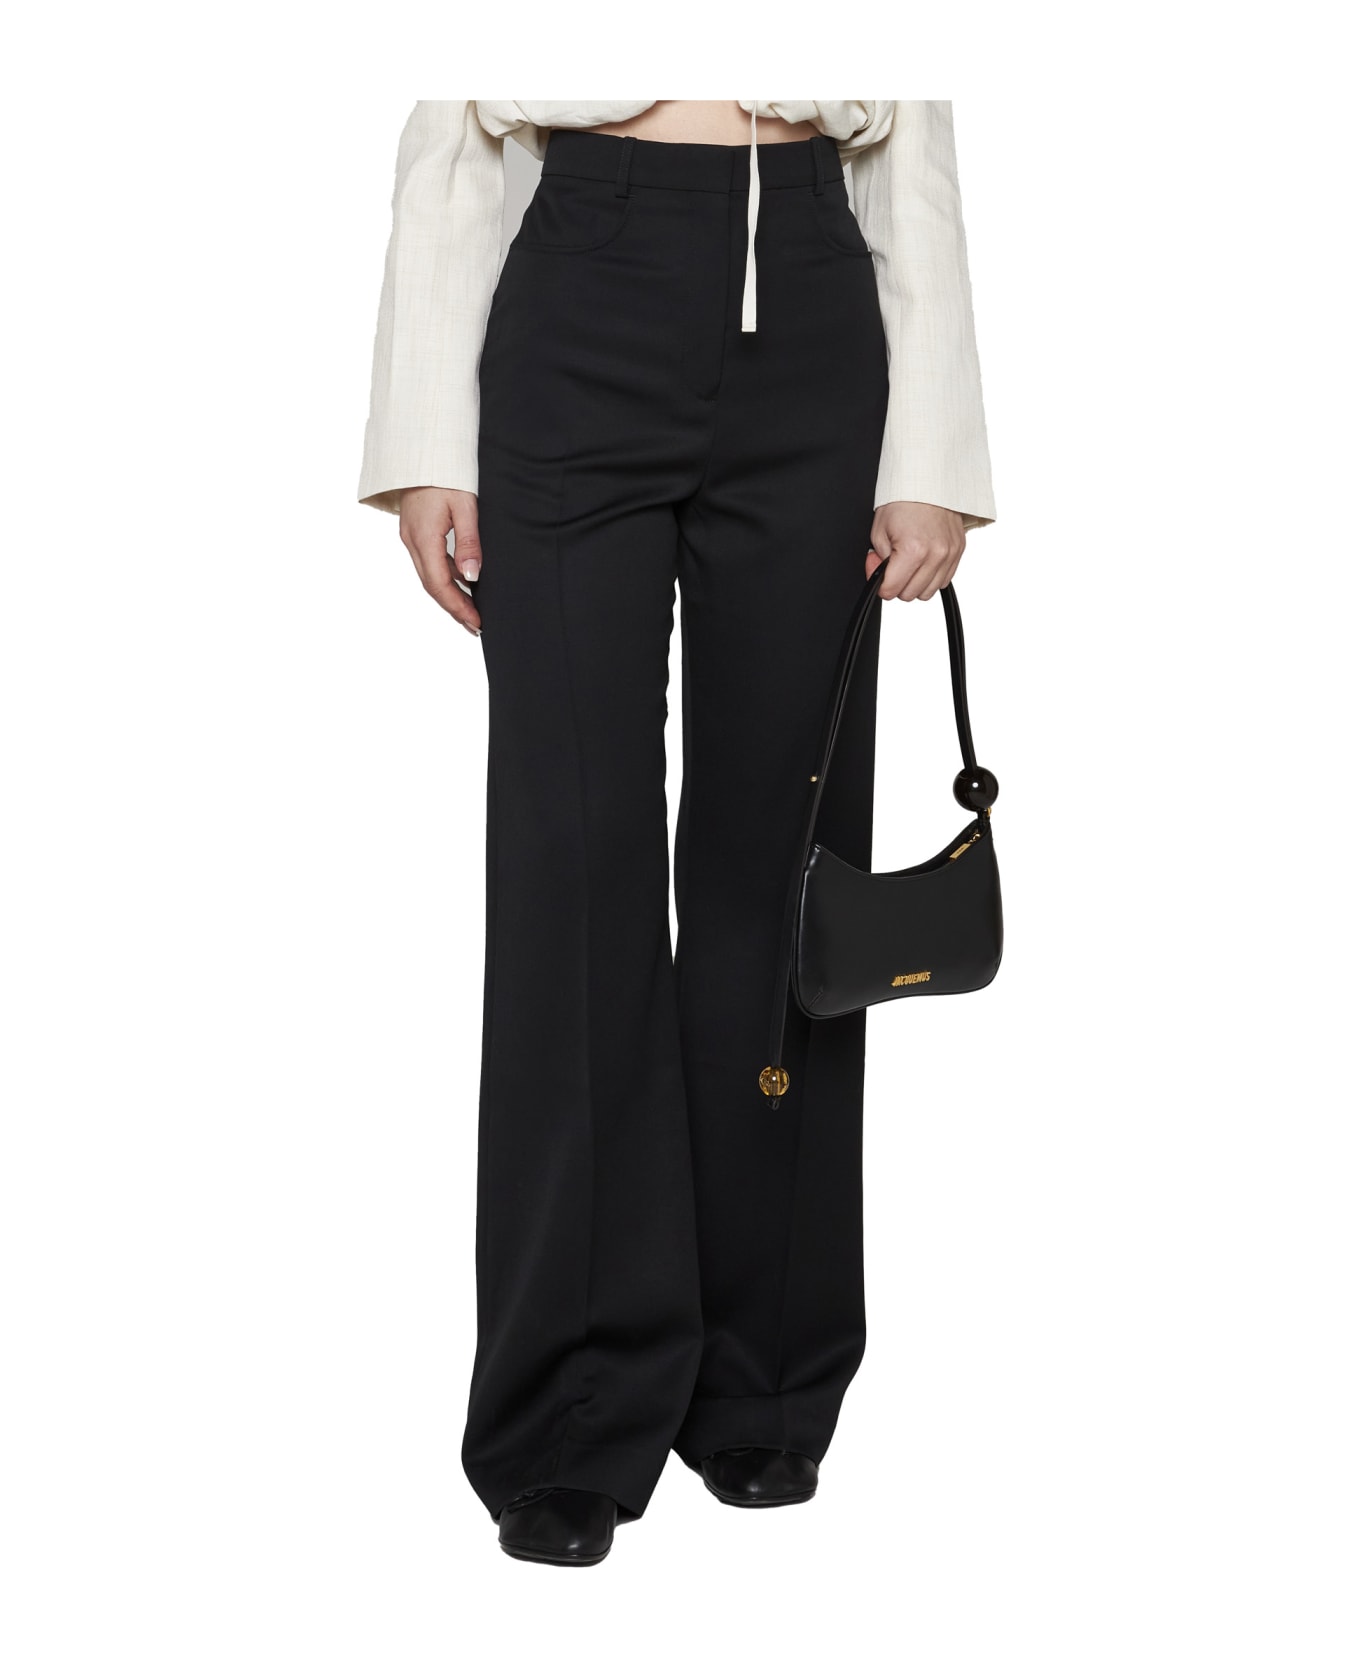 Jacquemus 'sauge' Pleat-front Trousers - Black ボトムス